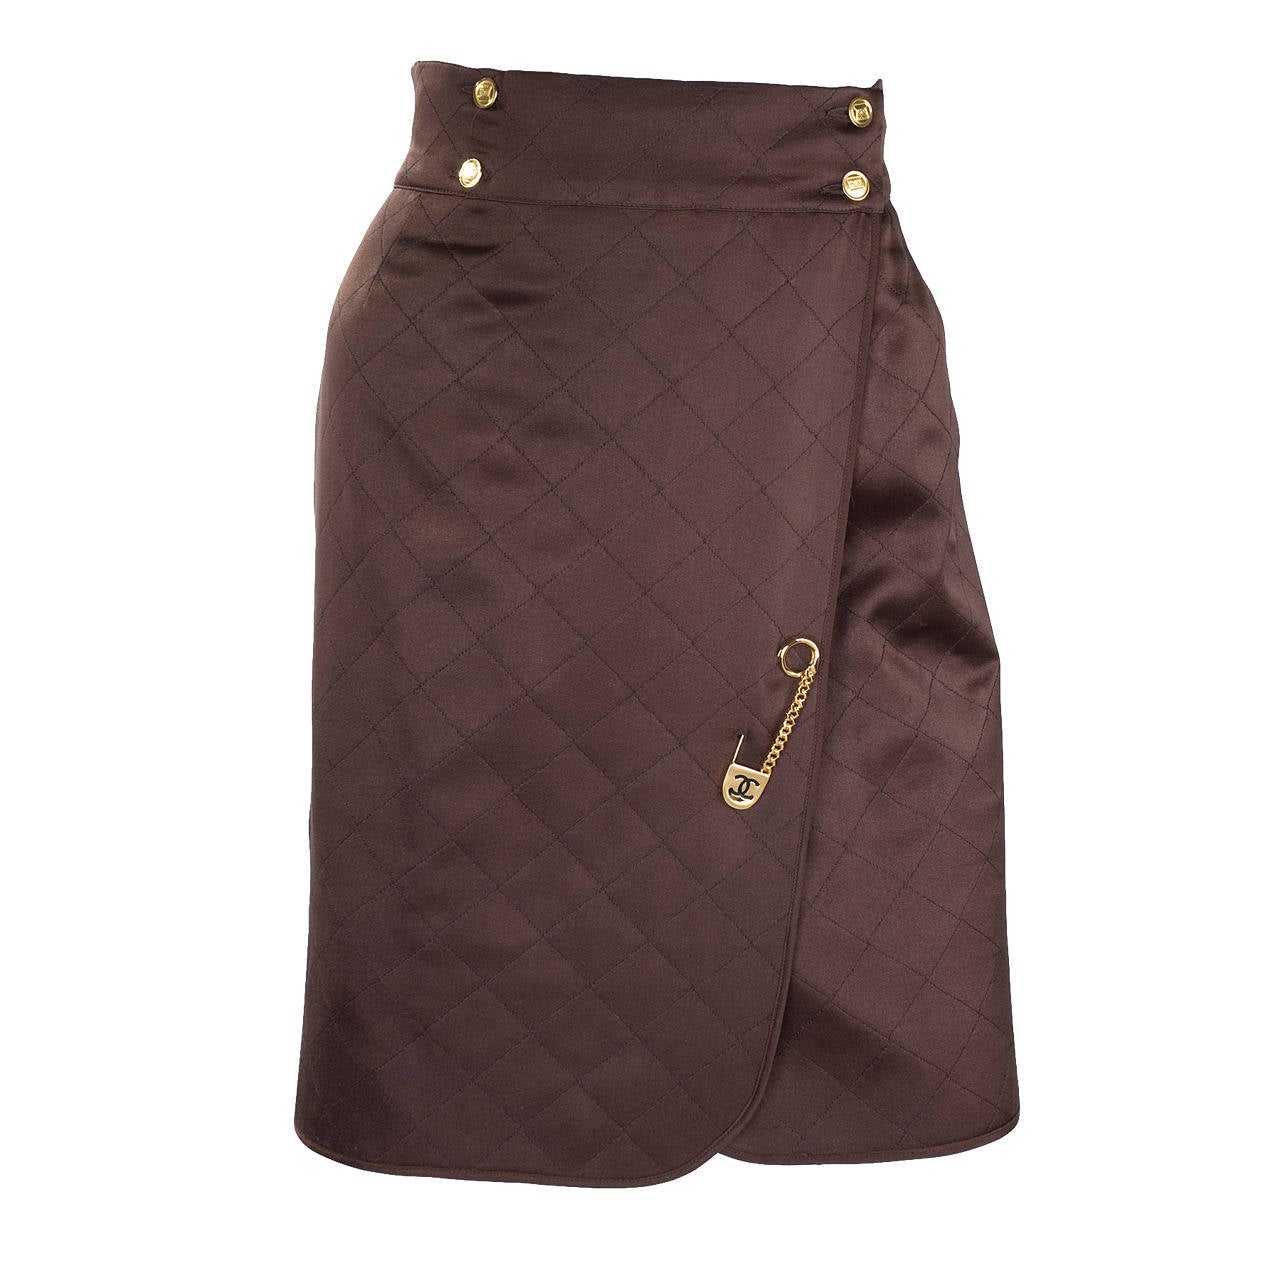 Vintage Brown Chanel Wrap Skirt With CC Safety Pin